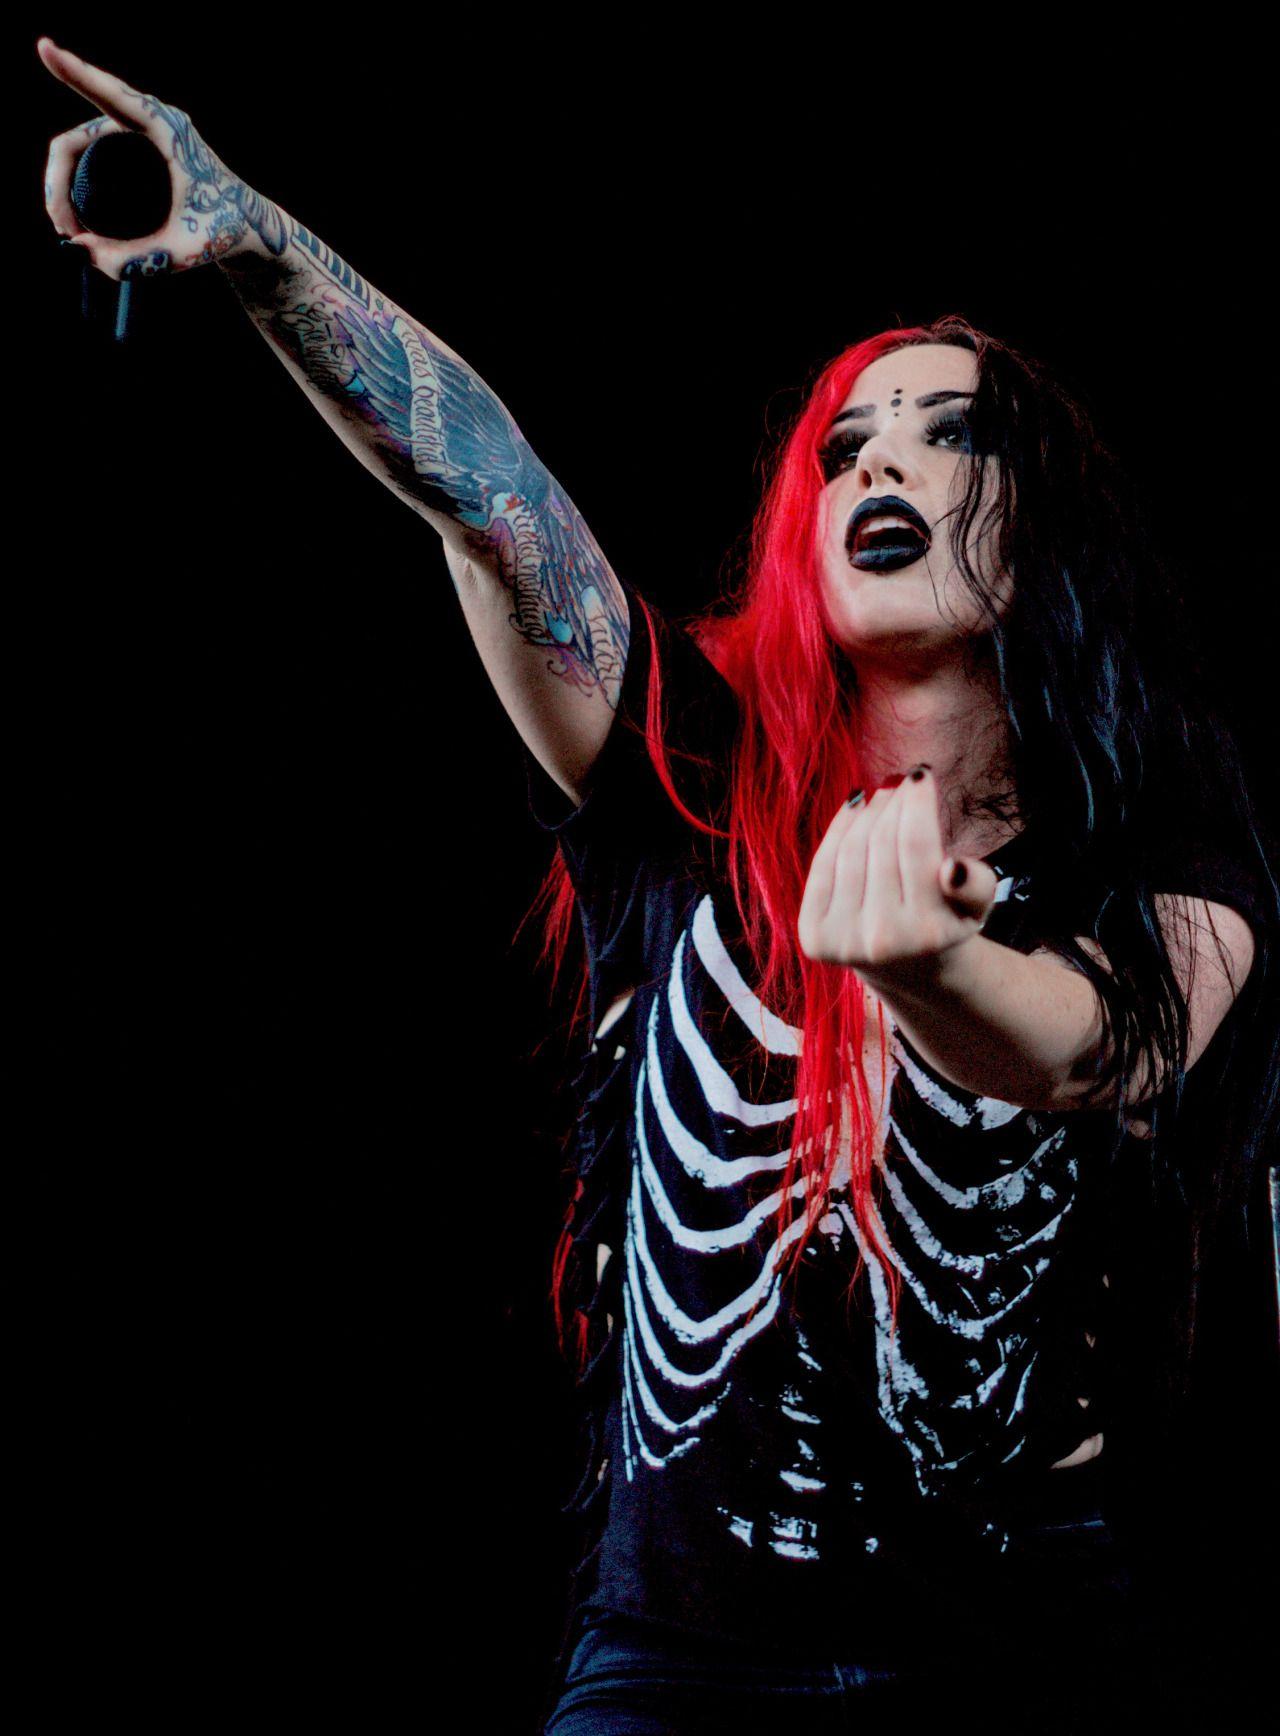 Ashley from New Years Day ♥. Bands. New years day band